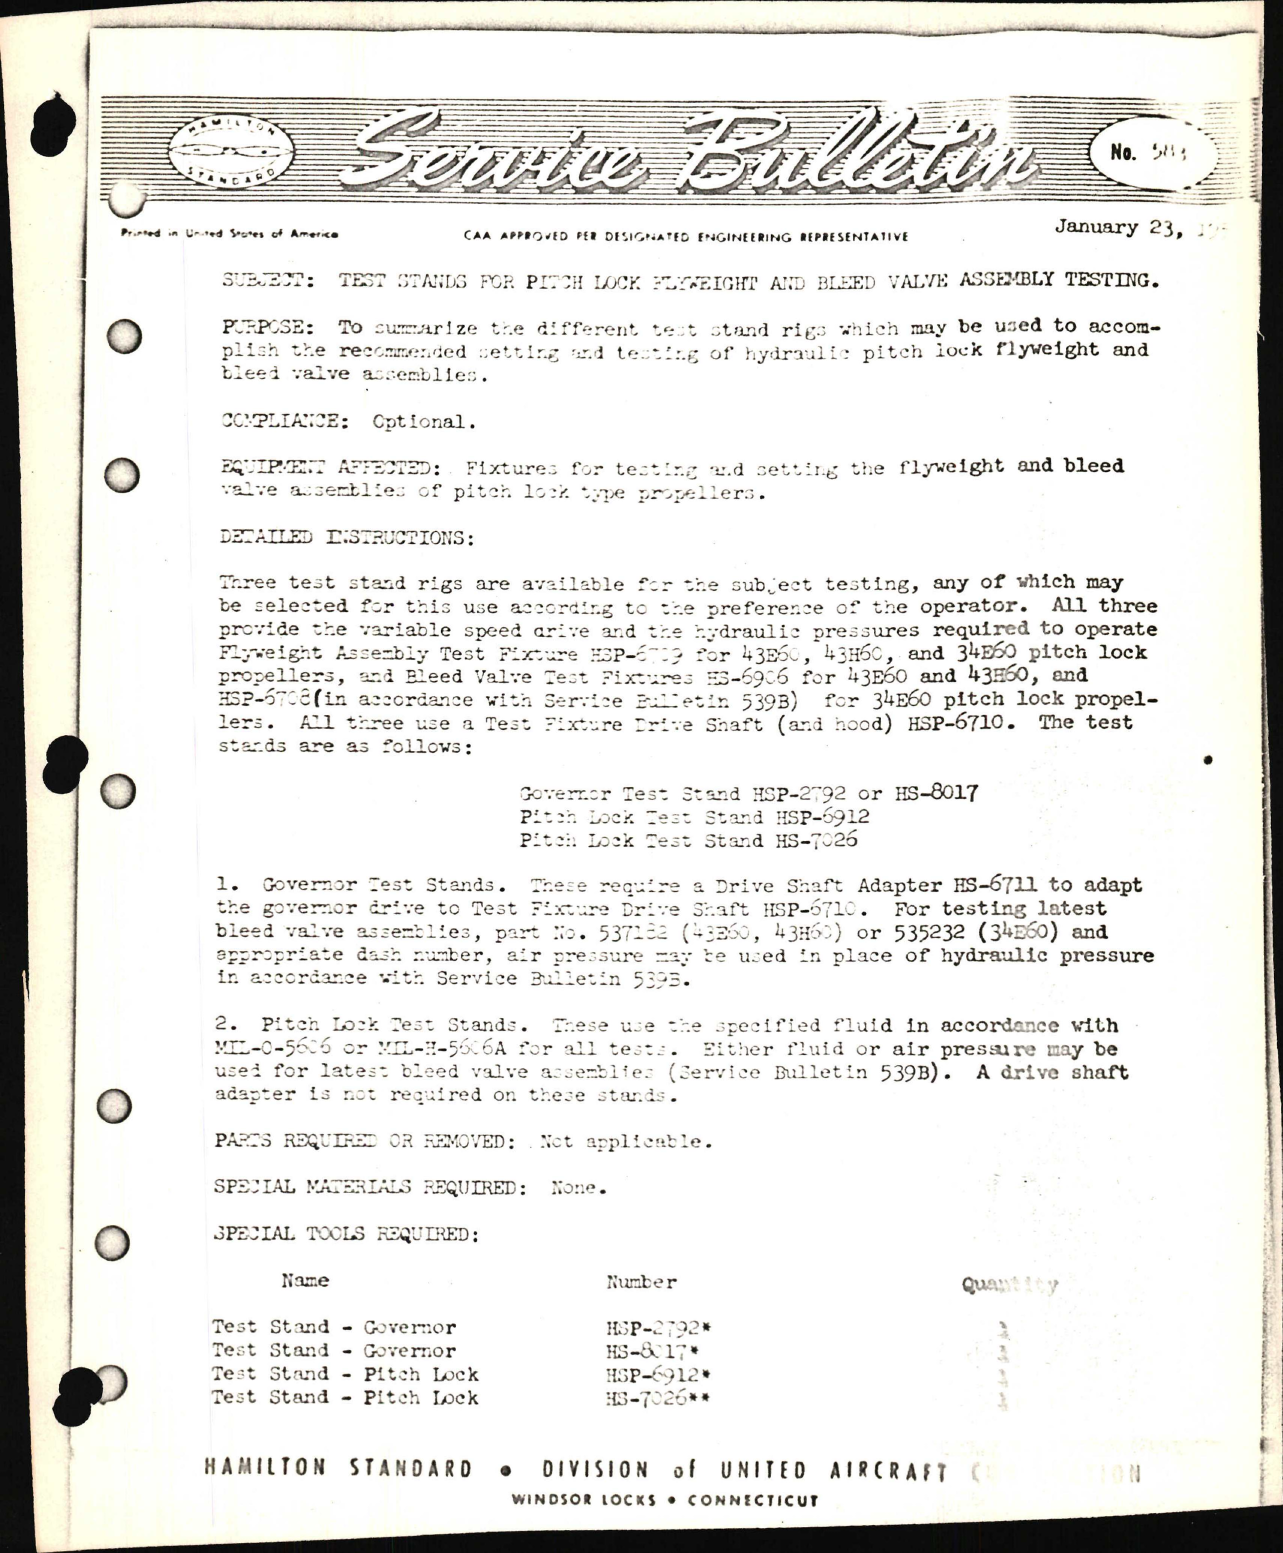 Sample page 1 from AirCorps Library document: Test Stands for Pitch Lock Flyweight and Bleed Valve Assembly Testing